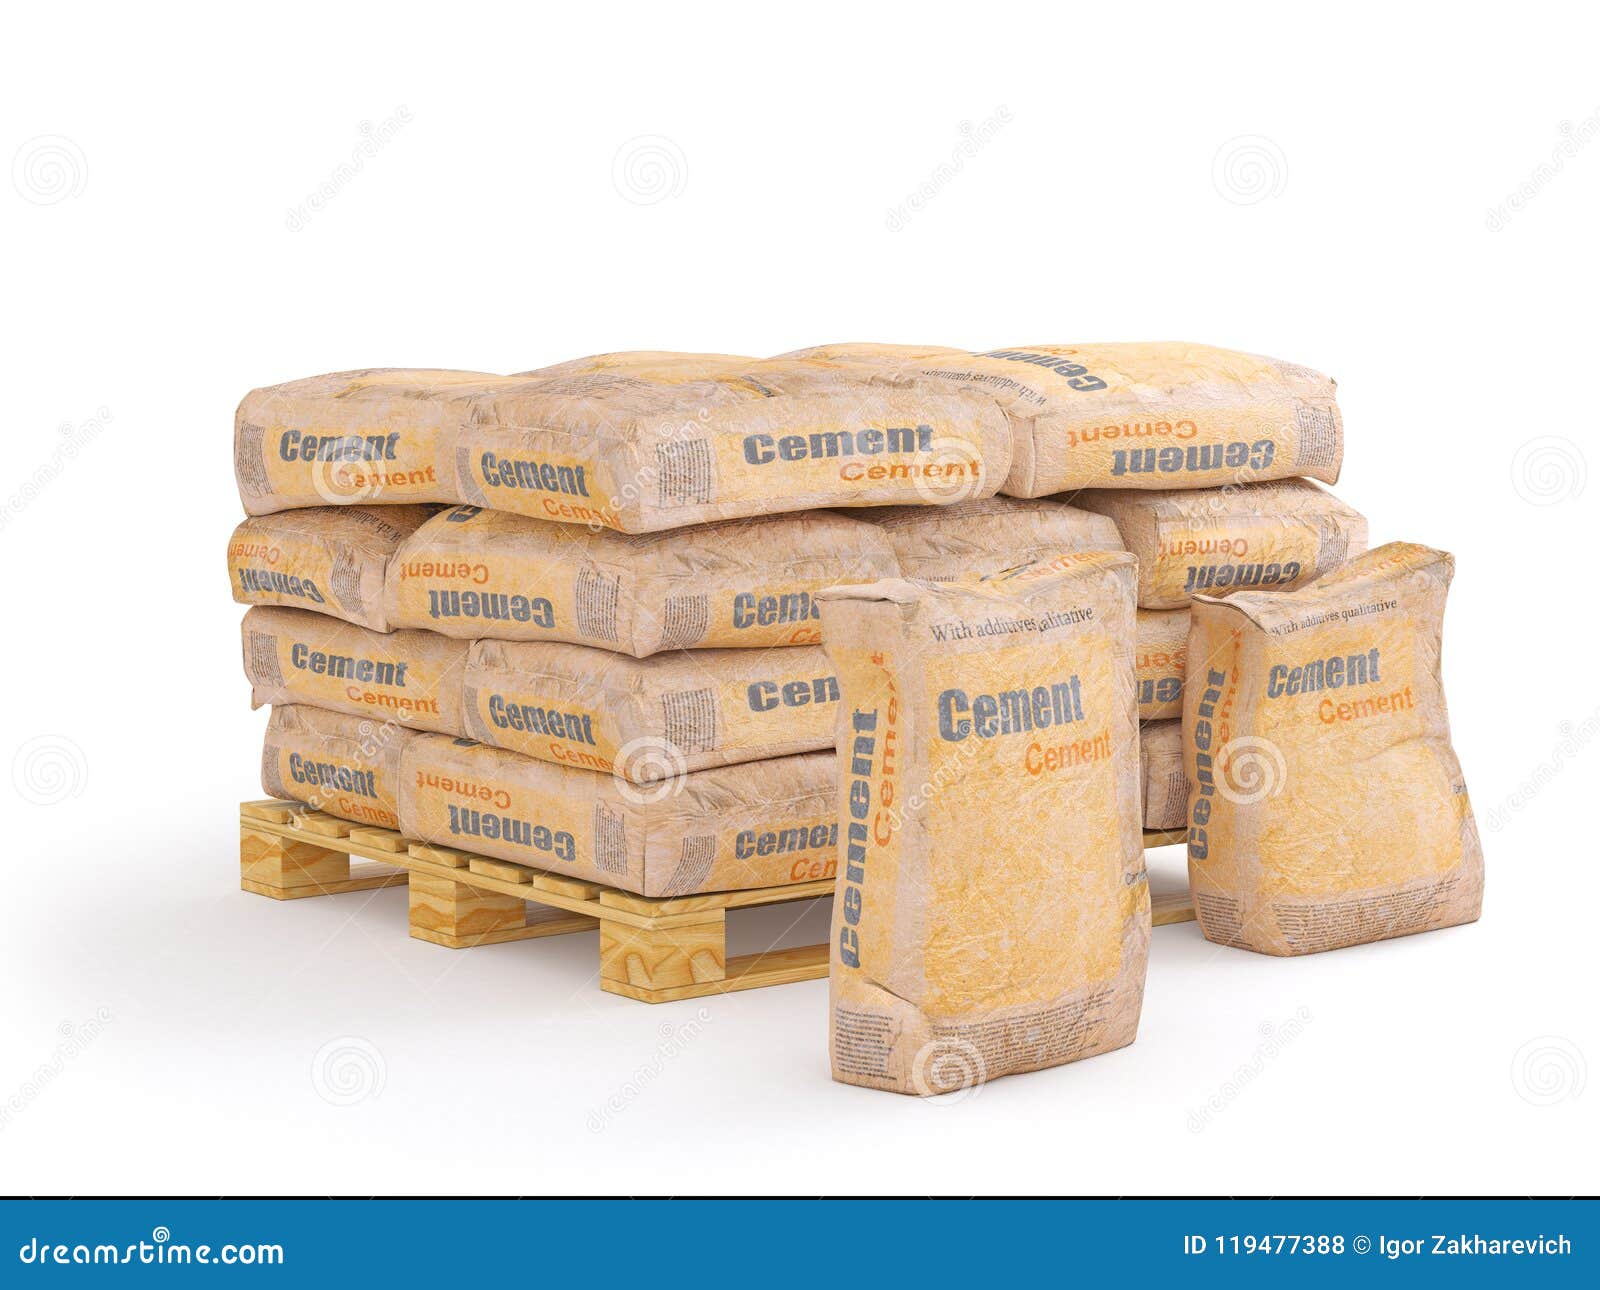 cement in bags on pallet, 3d rendering